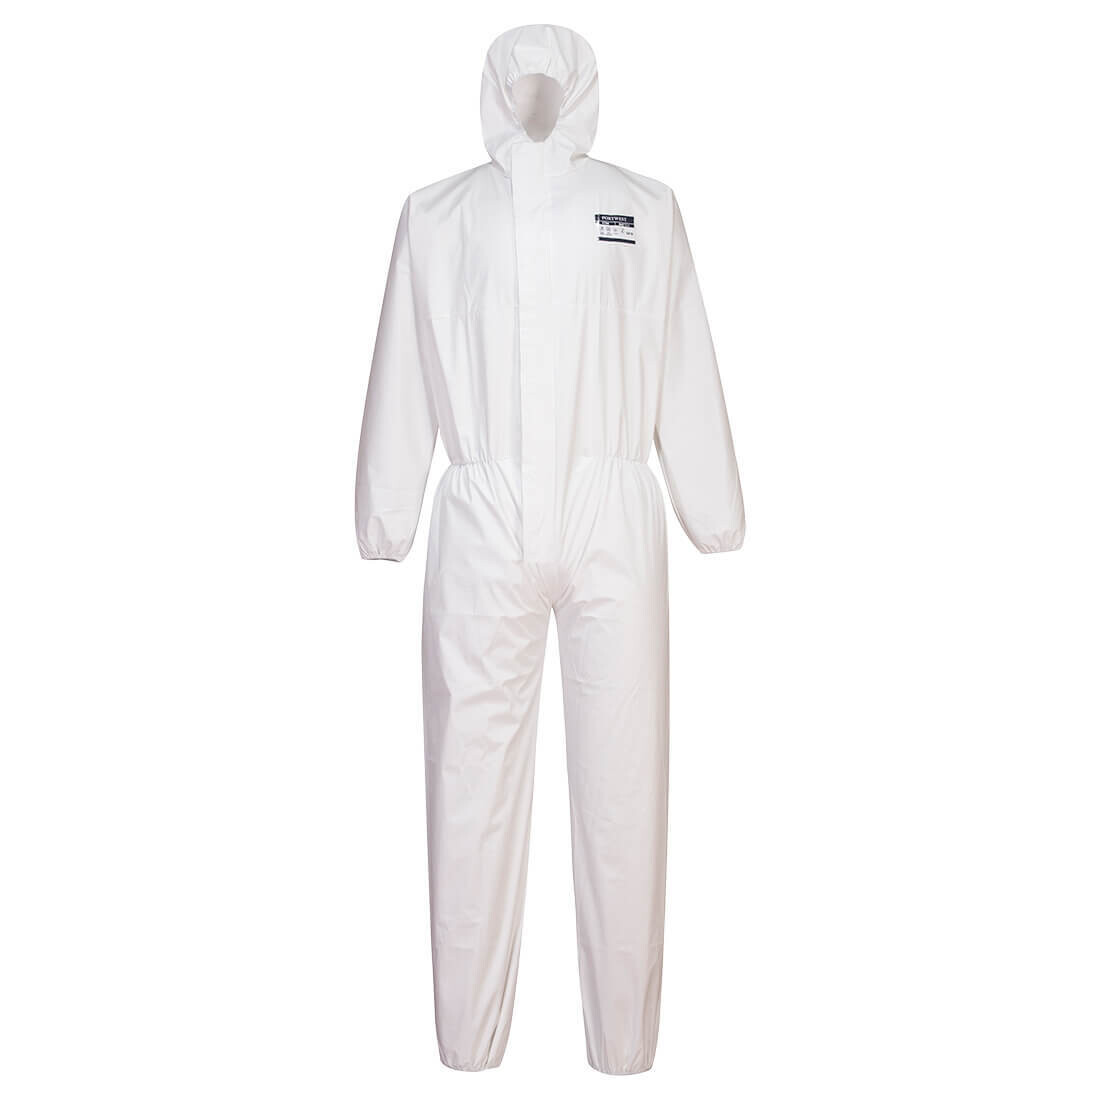 Portwest ST30 - BizTex SMS Coverall Type 5/6, White